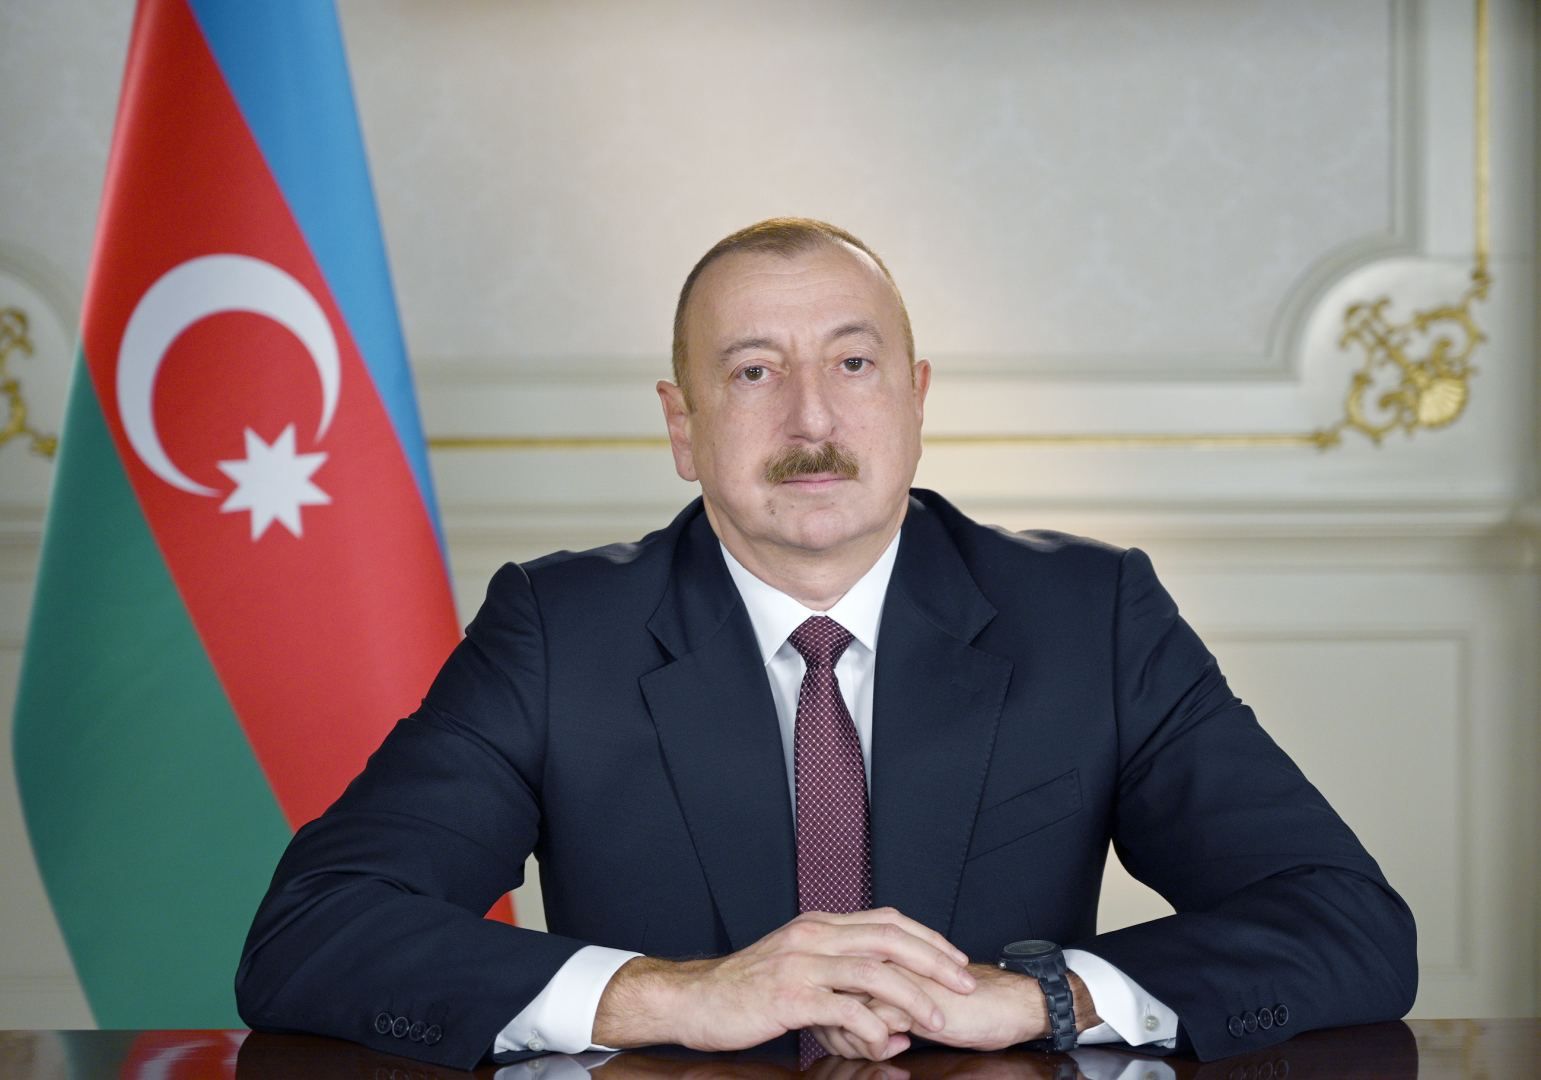 Azerbaijan's Ministry of Internal Affairs vested with new powers